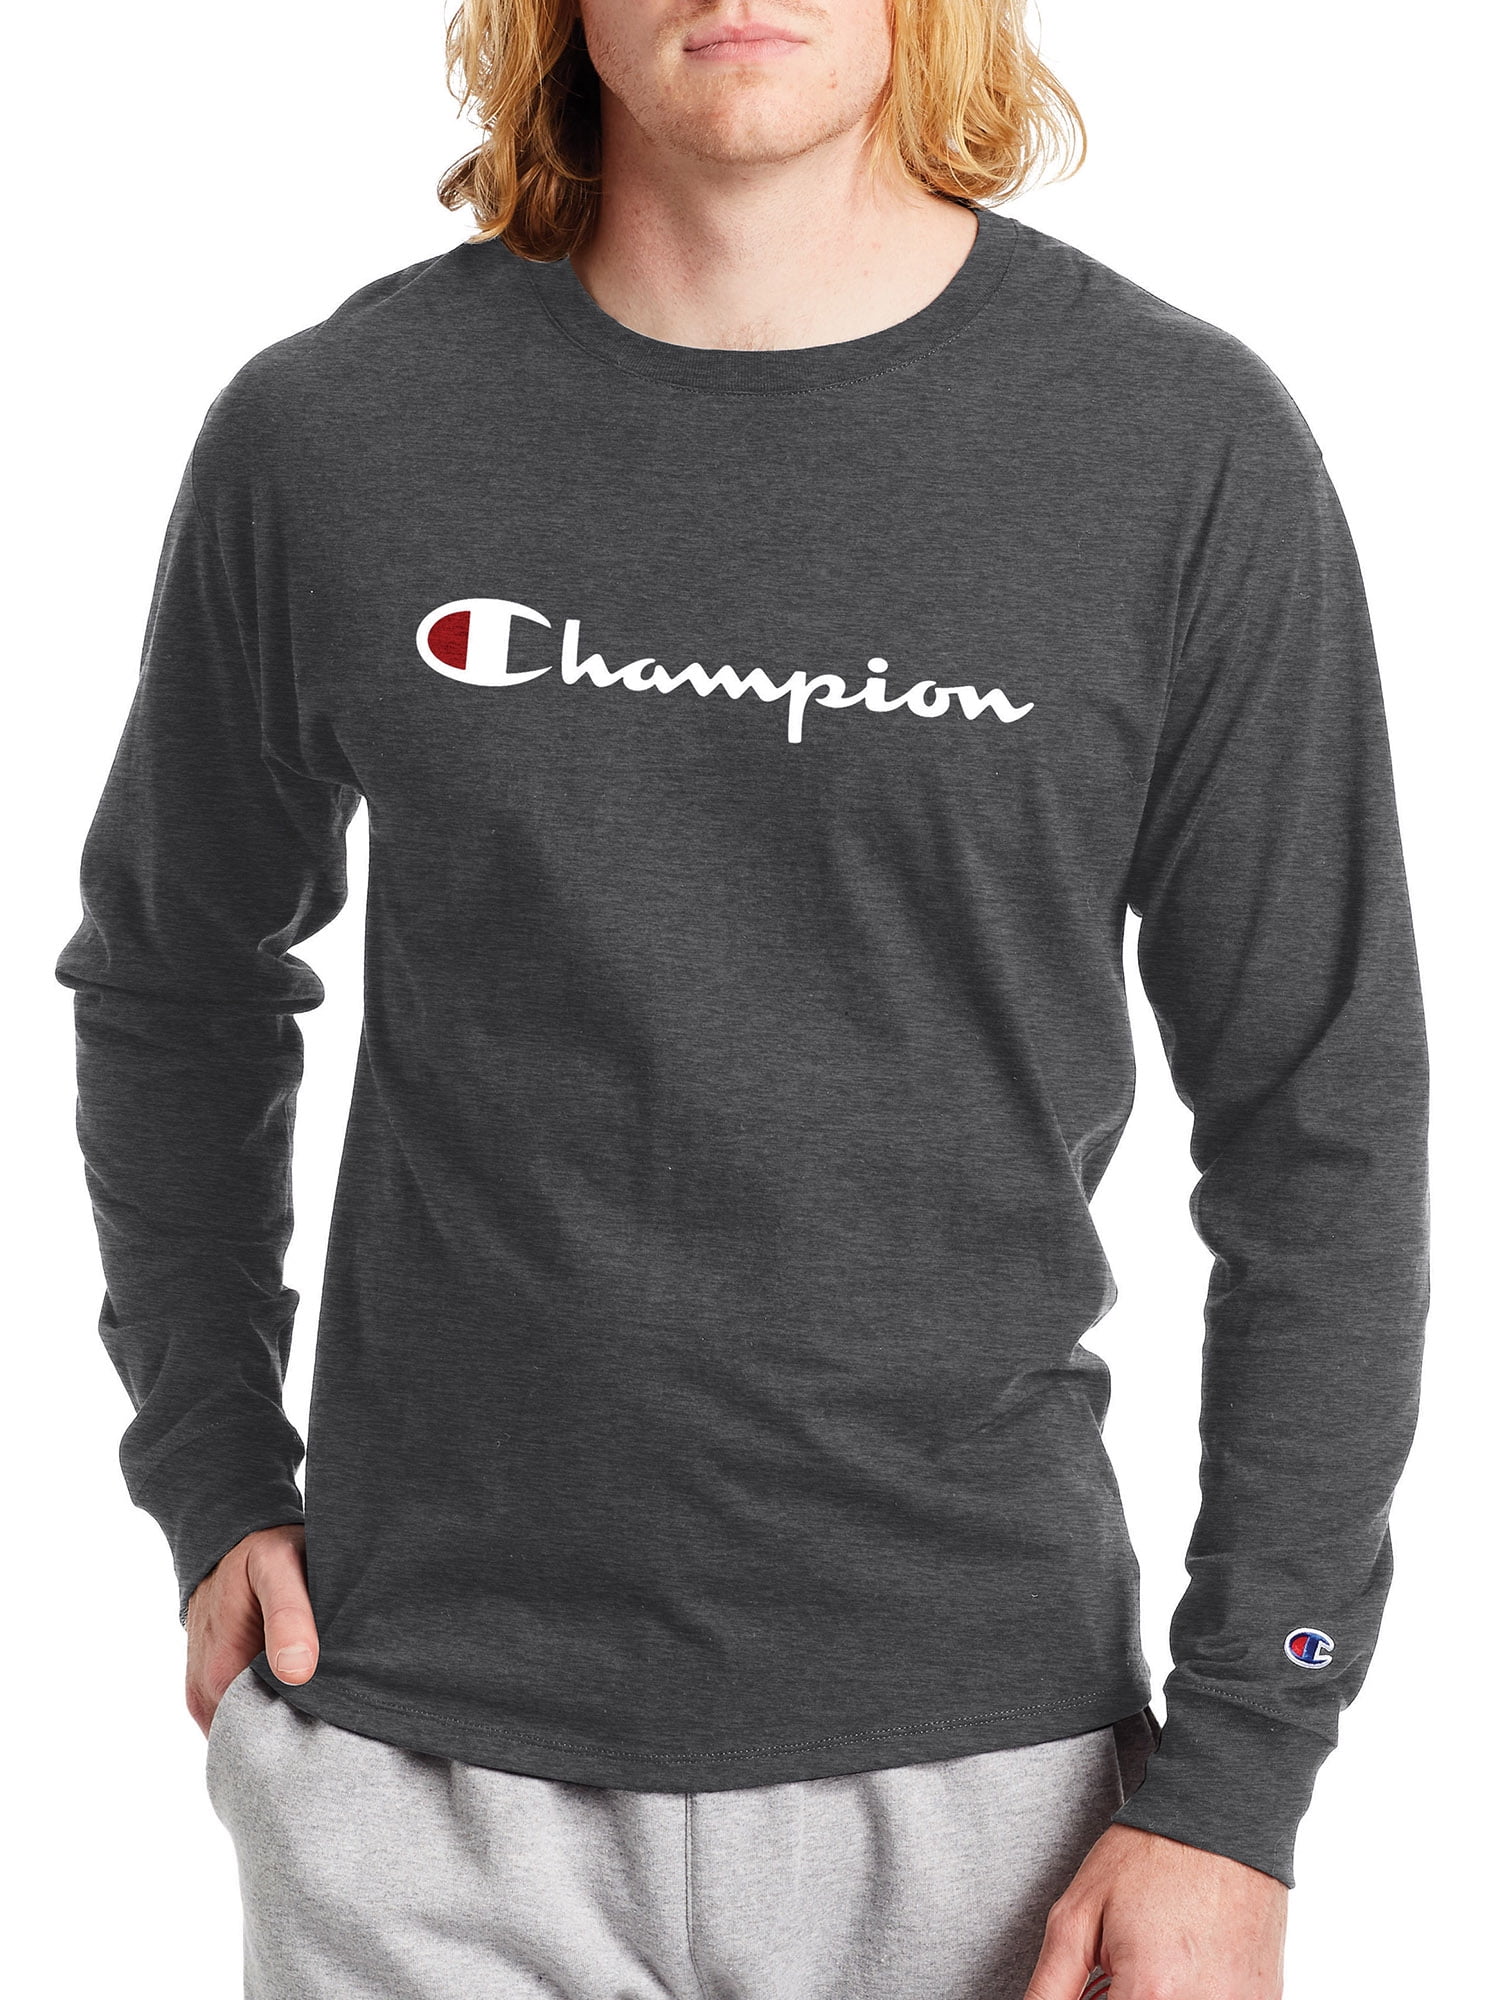 champion clothing outlet near me